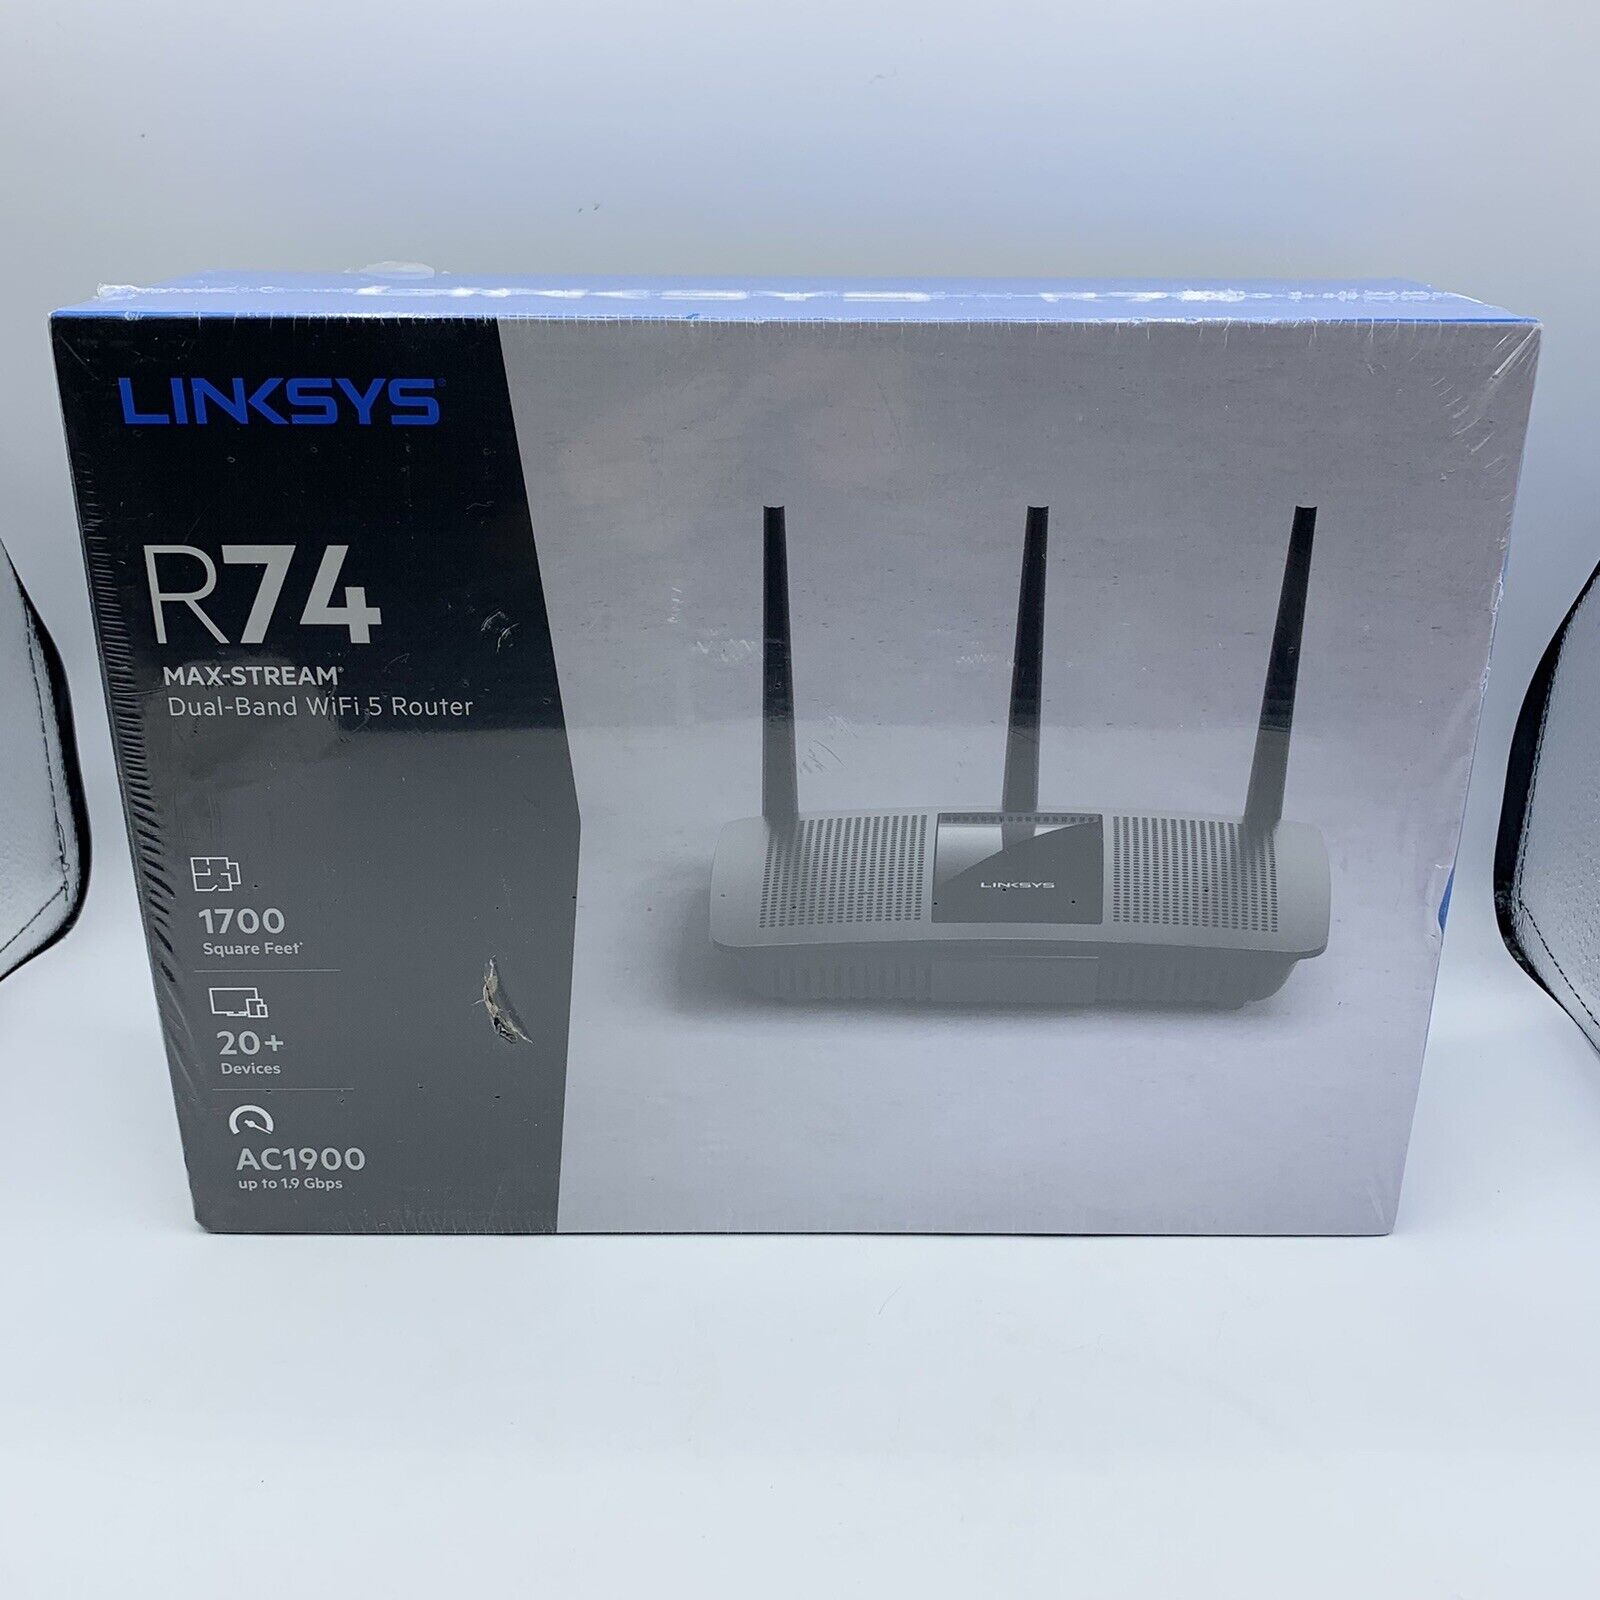 Linksys R74 EA7450 Max-Stream AC1900 Wireless Dual-Band WiFi 5 Router SEALED NEW